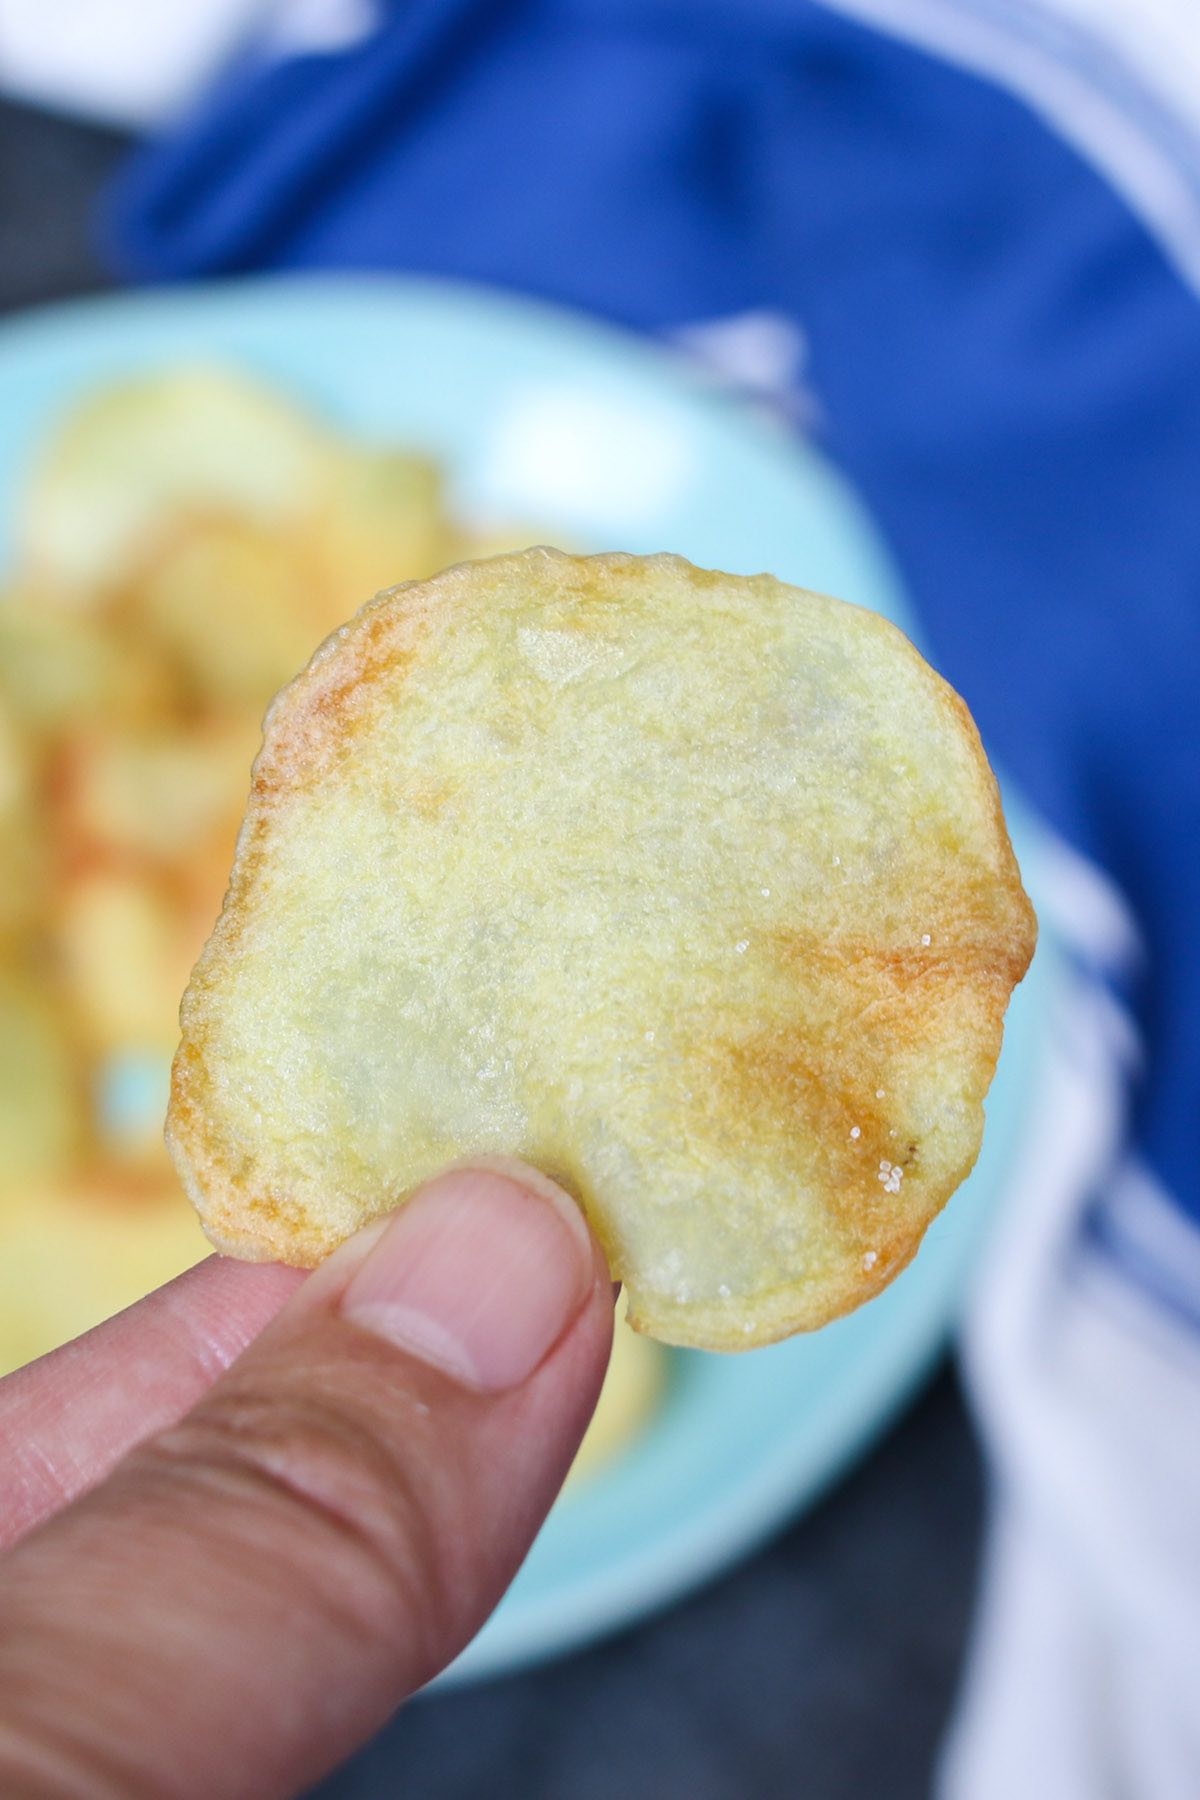 Holding a piece of potato chip, showing the perfect crispy texture.